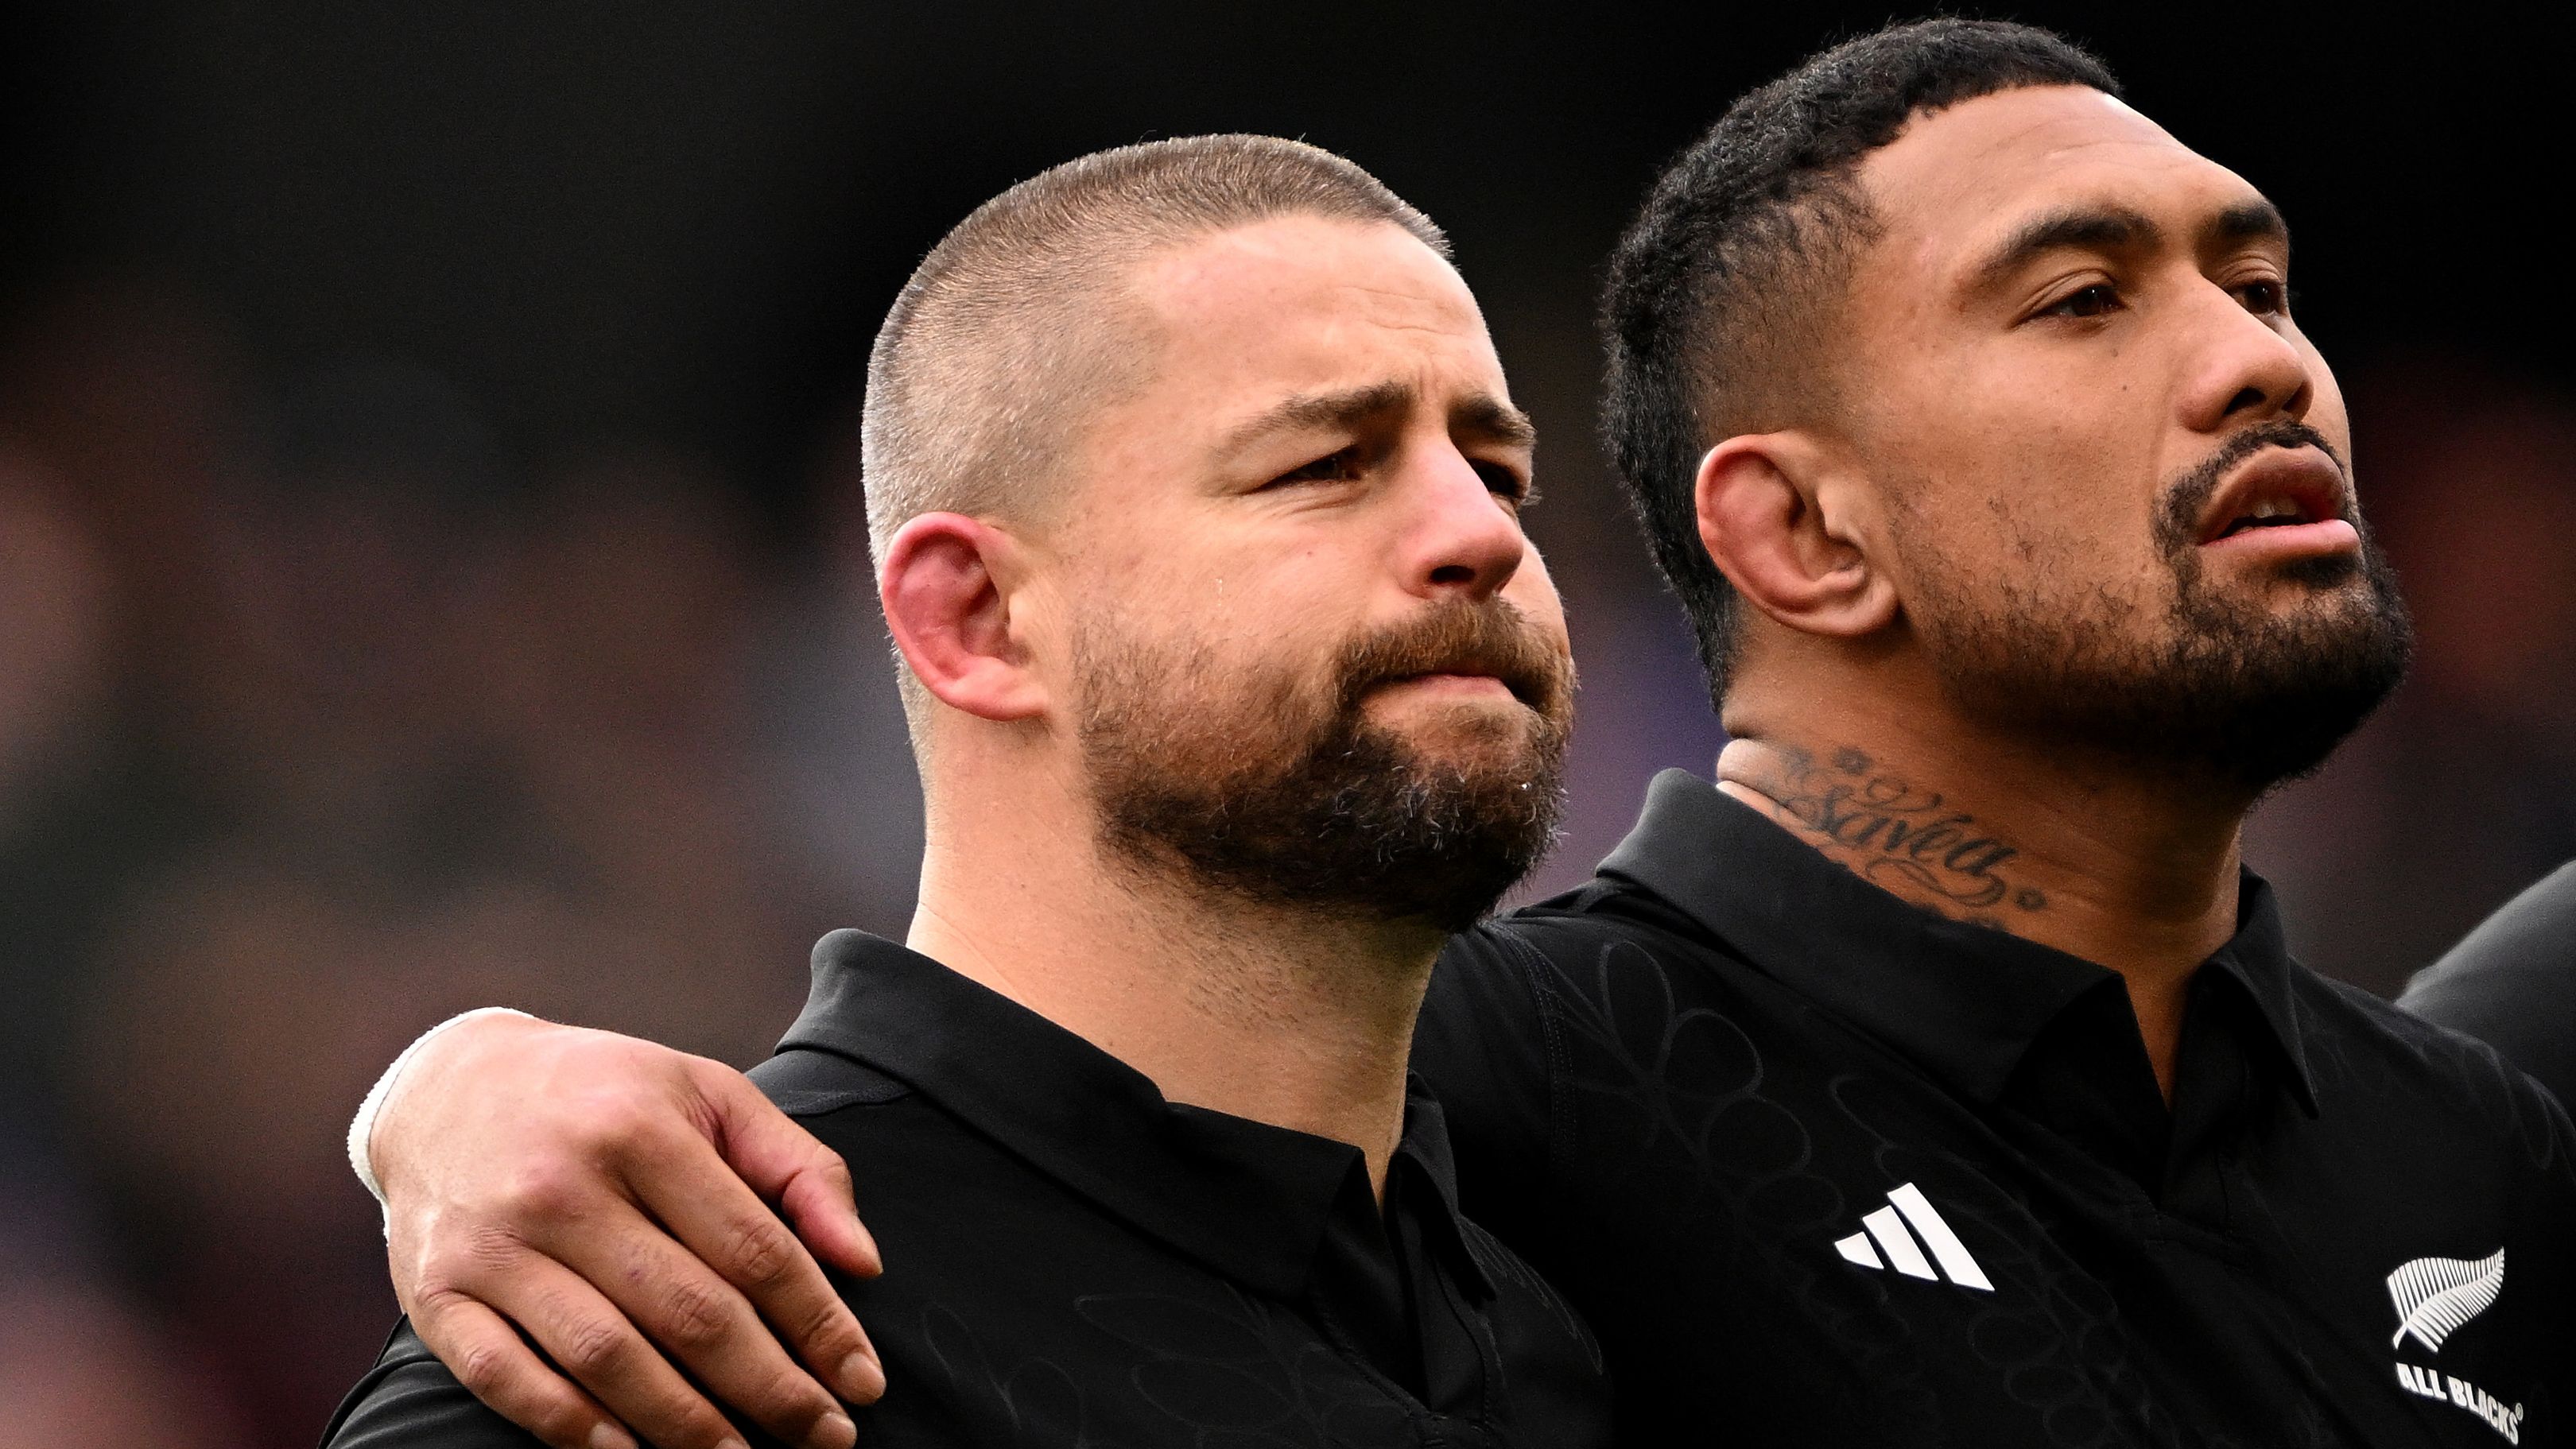 Dane Coles and Ardie Savea of New Zealand stand for the national anthems.